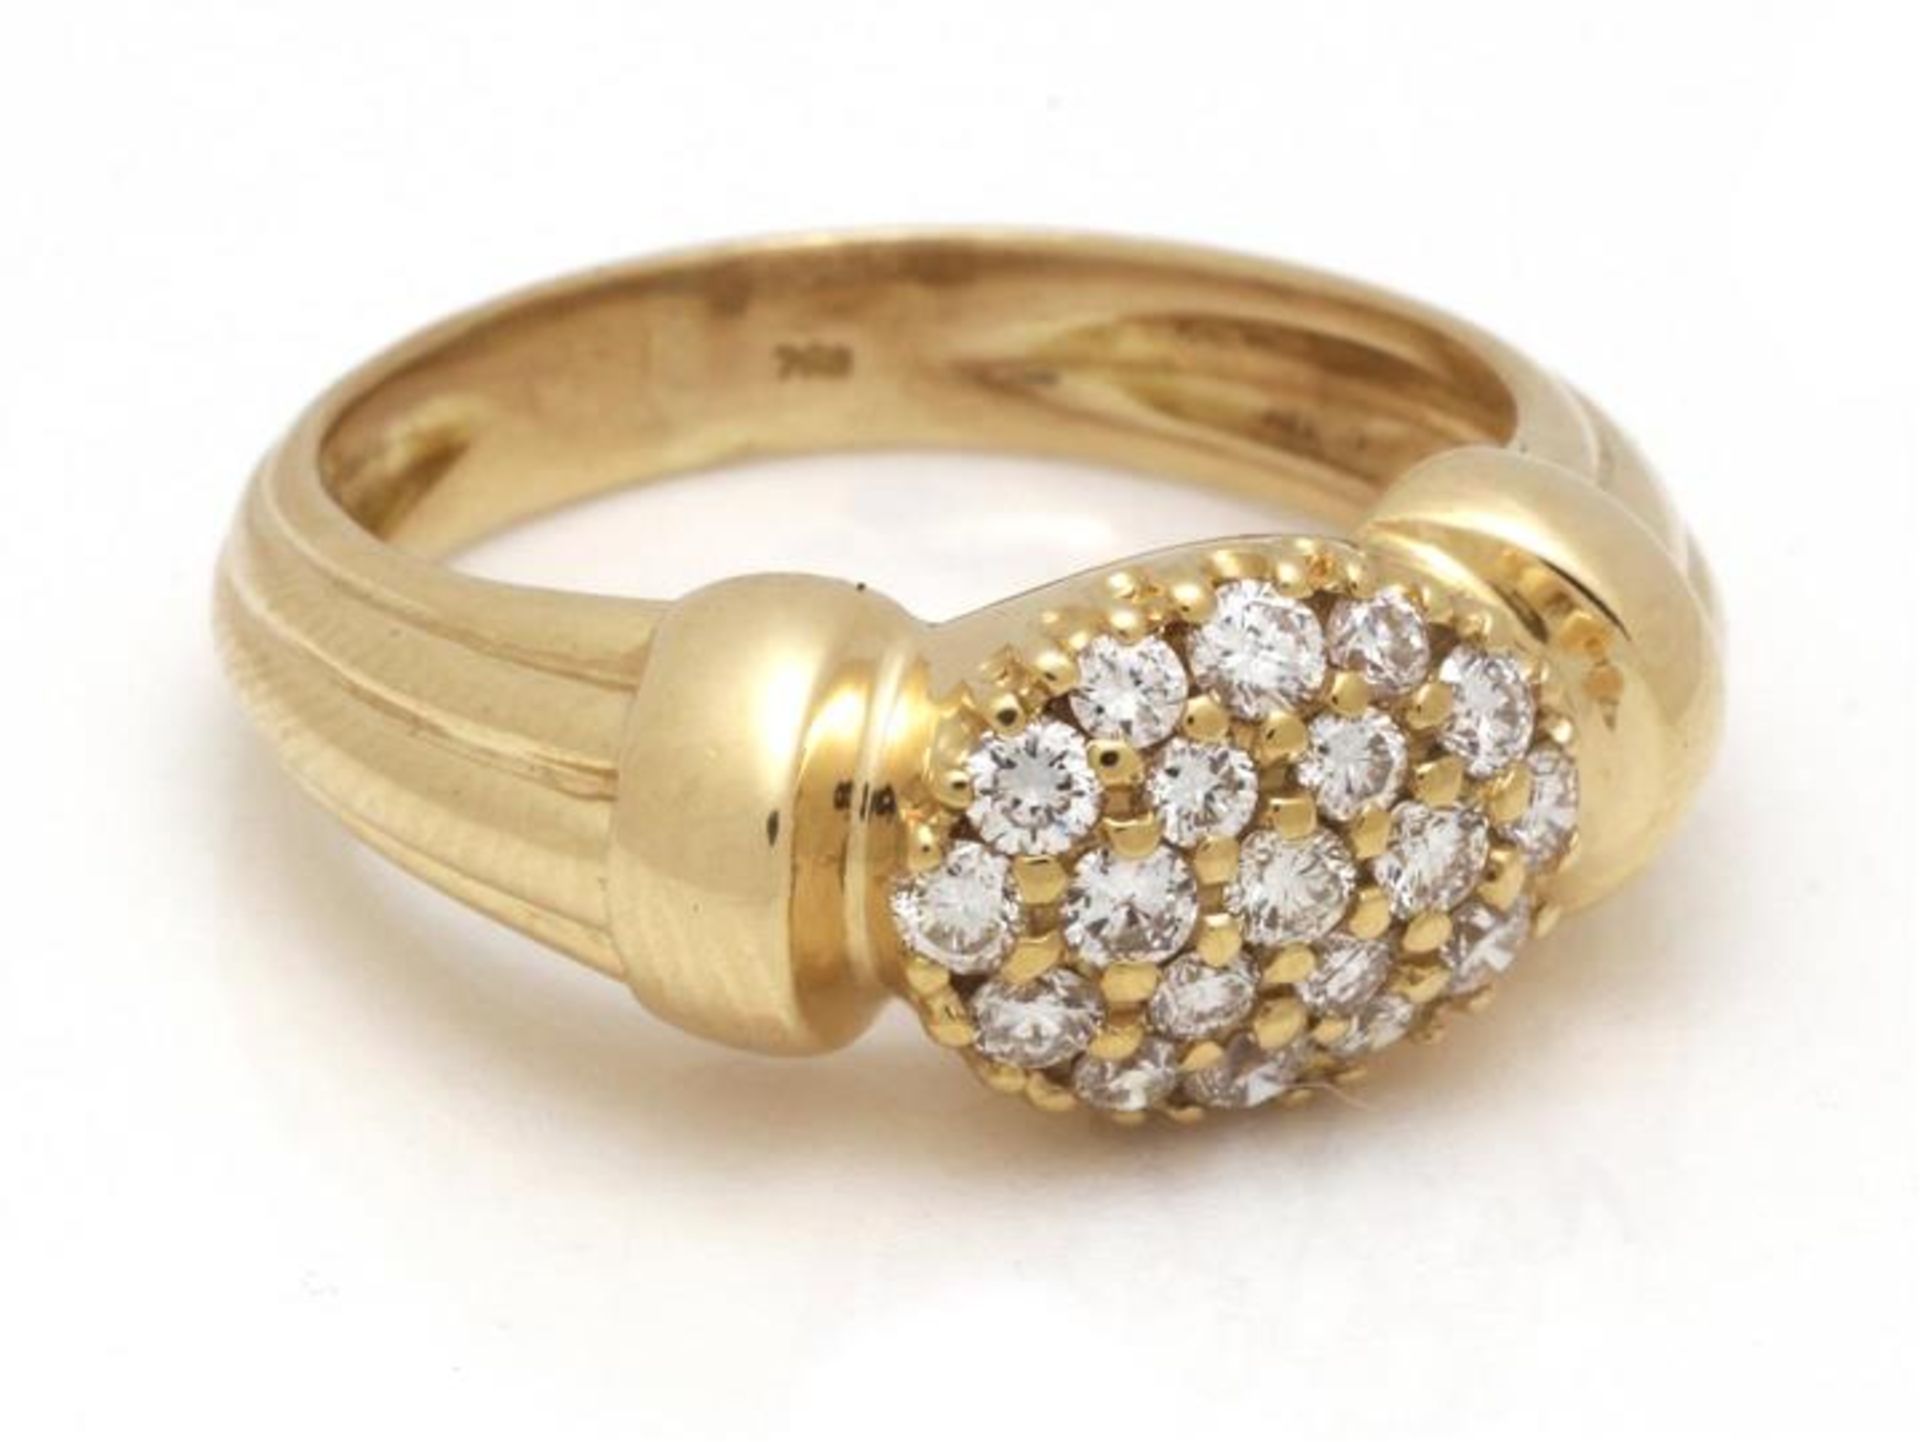 Gold fantasy ring, 18 kt, set with brilliant cut diamond, approx. 0.55 ct, 19 mm